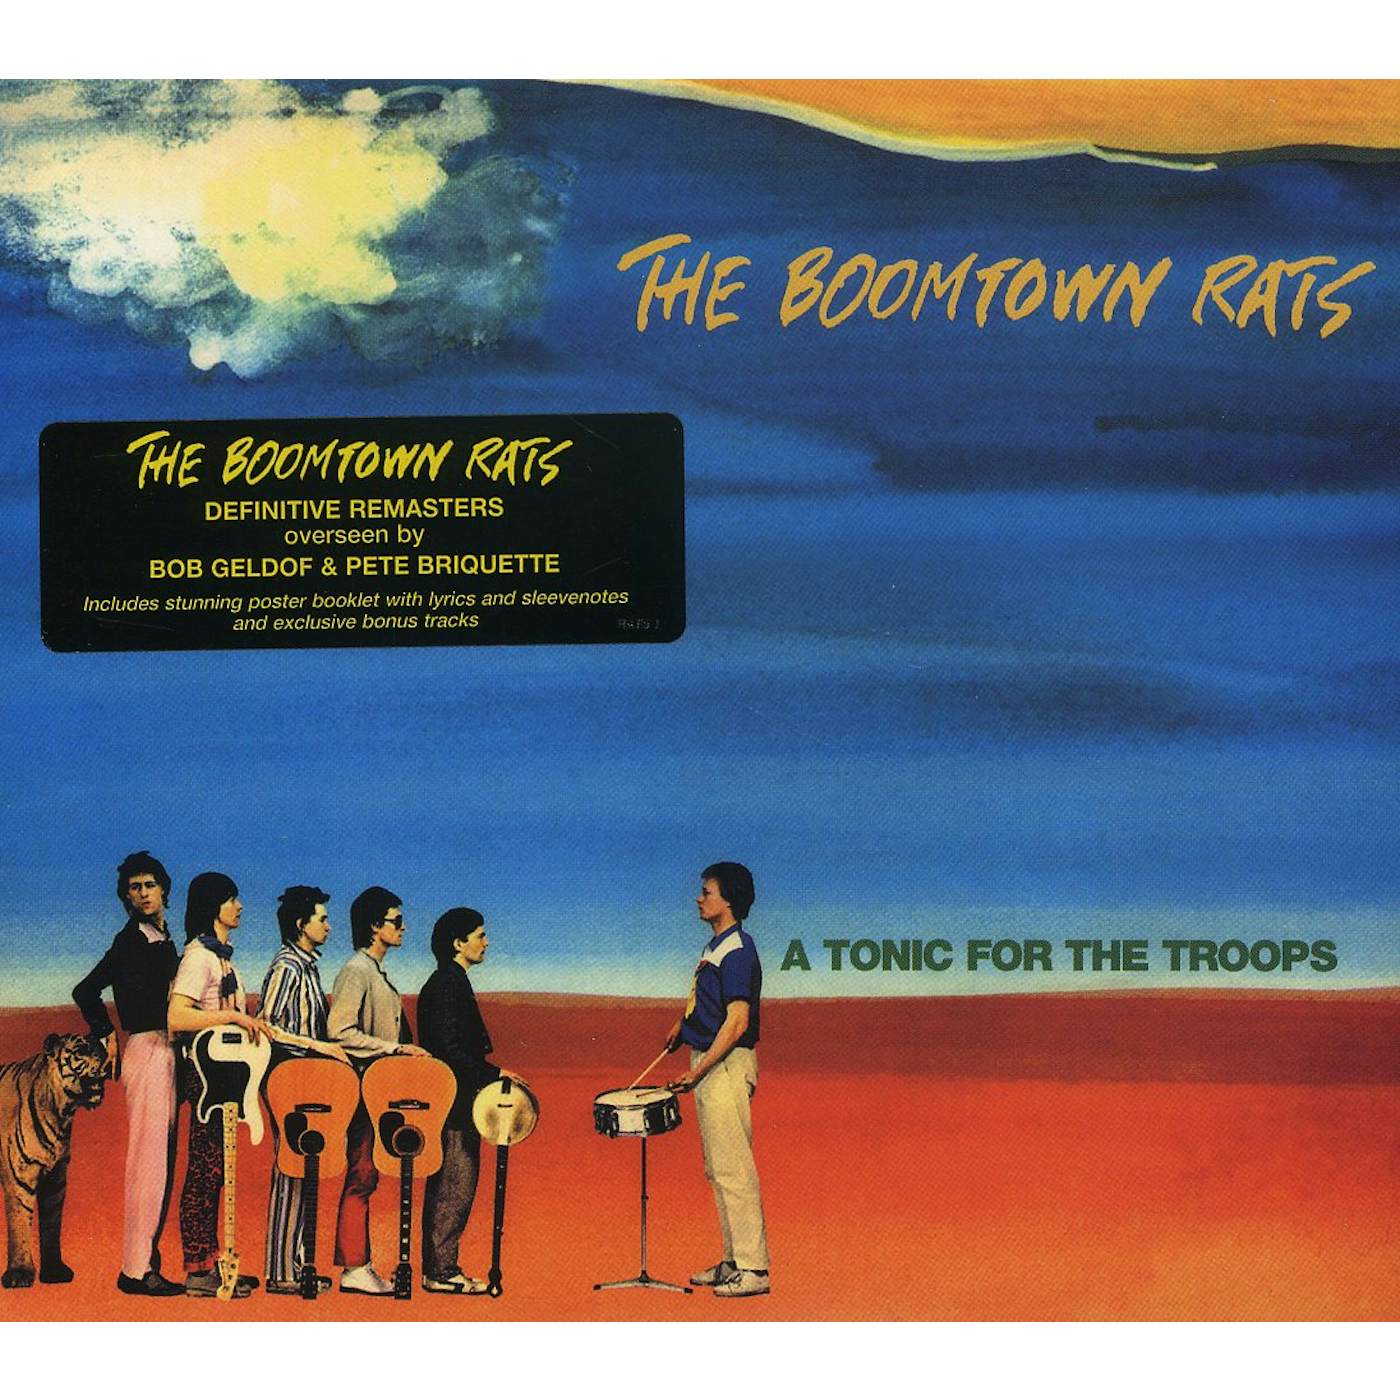 The Boomtown Rats TONIC FOR THE TROOPS CD